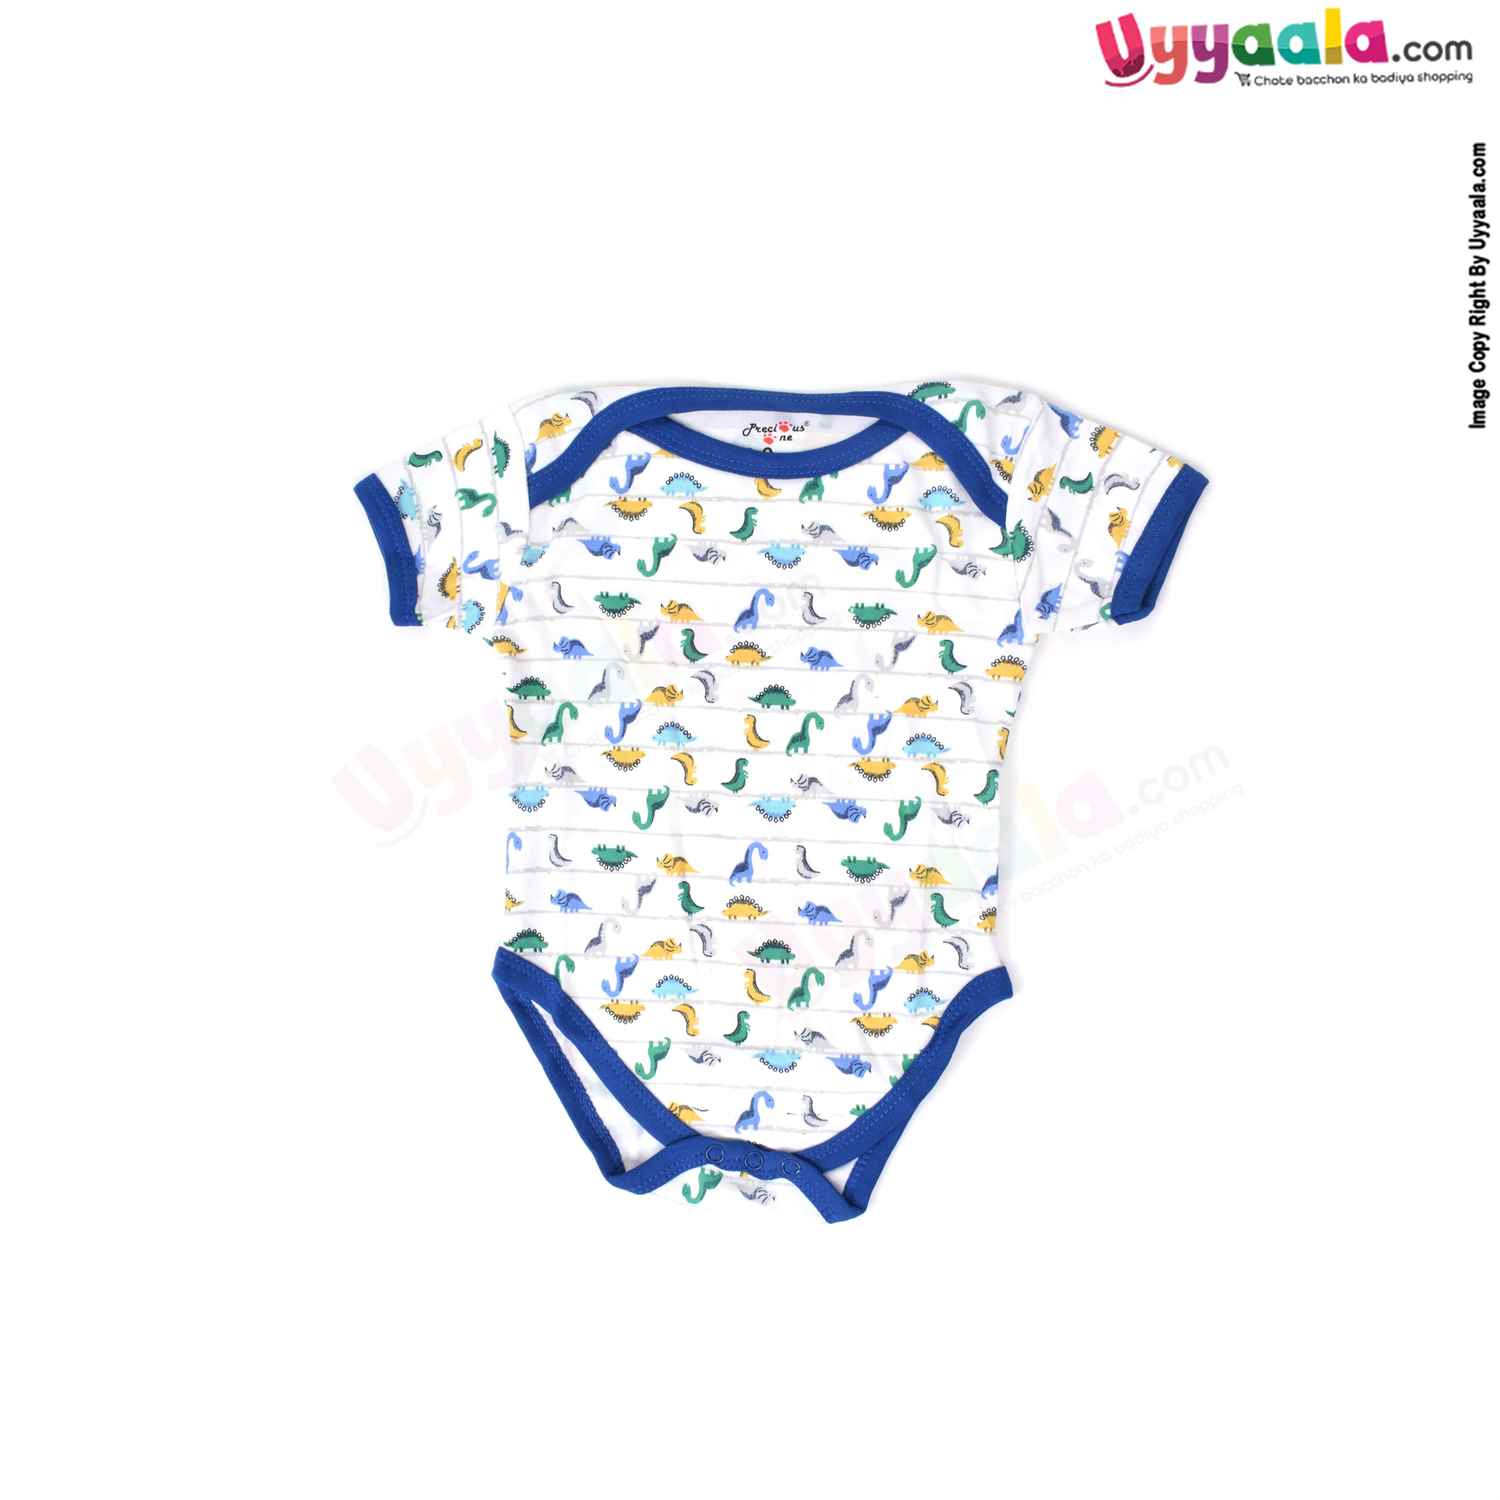 Precious One Short Sleeve Body Suit 100% Soft Hosiery Cotton - Navy Blue & White with Dinosaurs Print (6-9M)